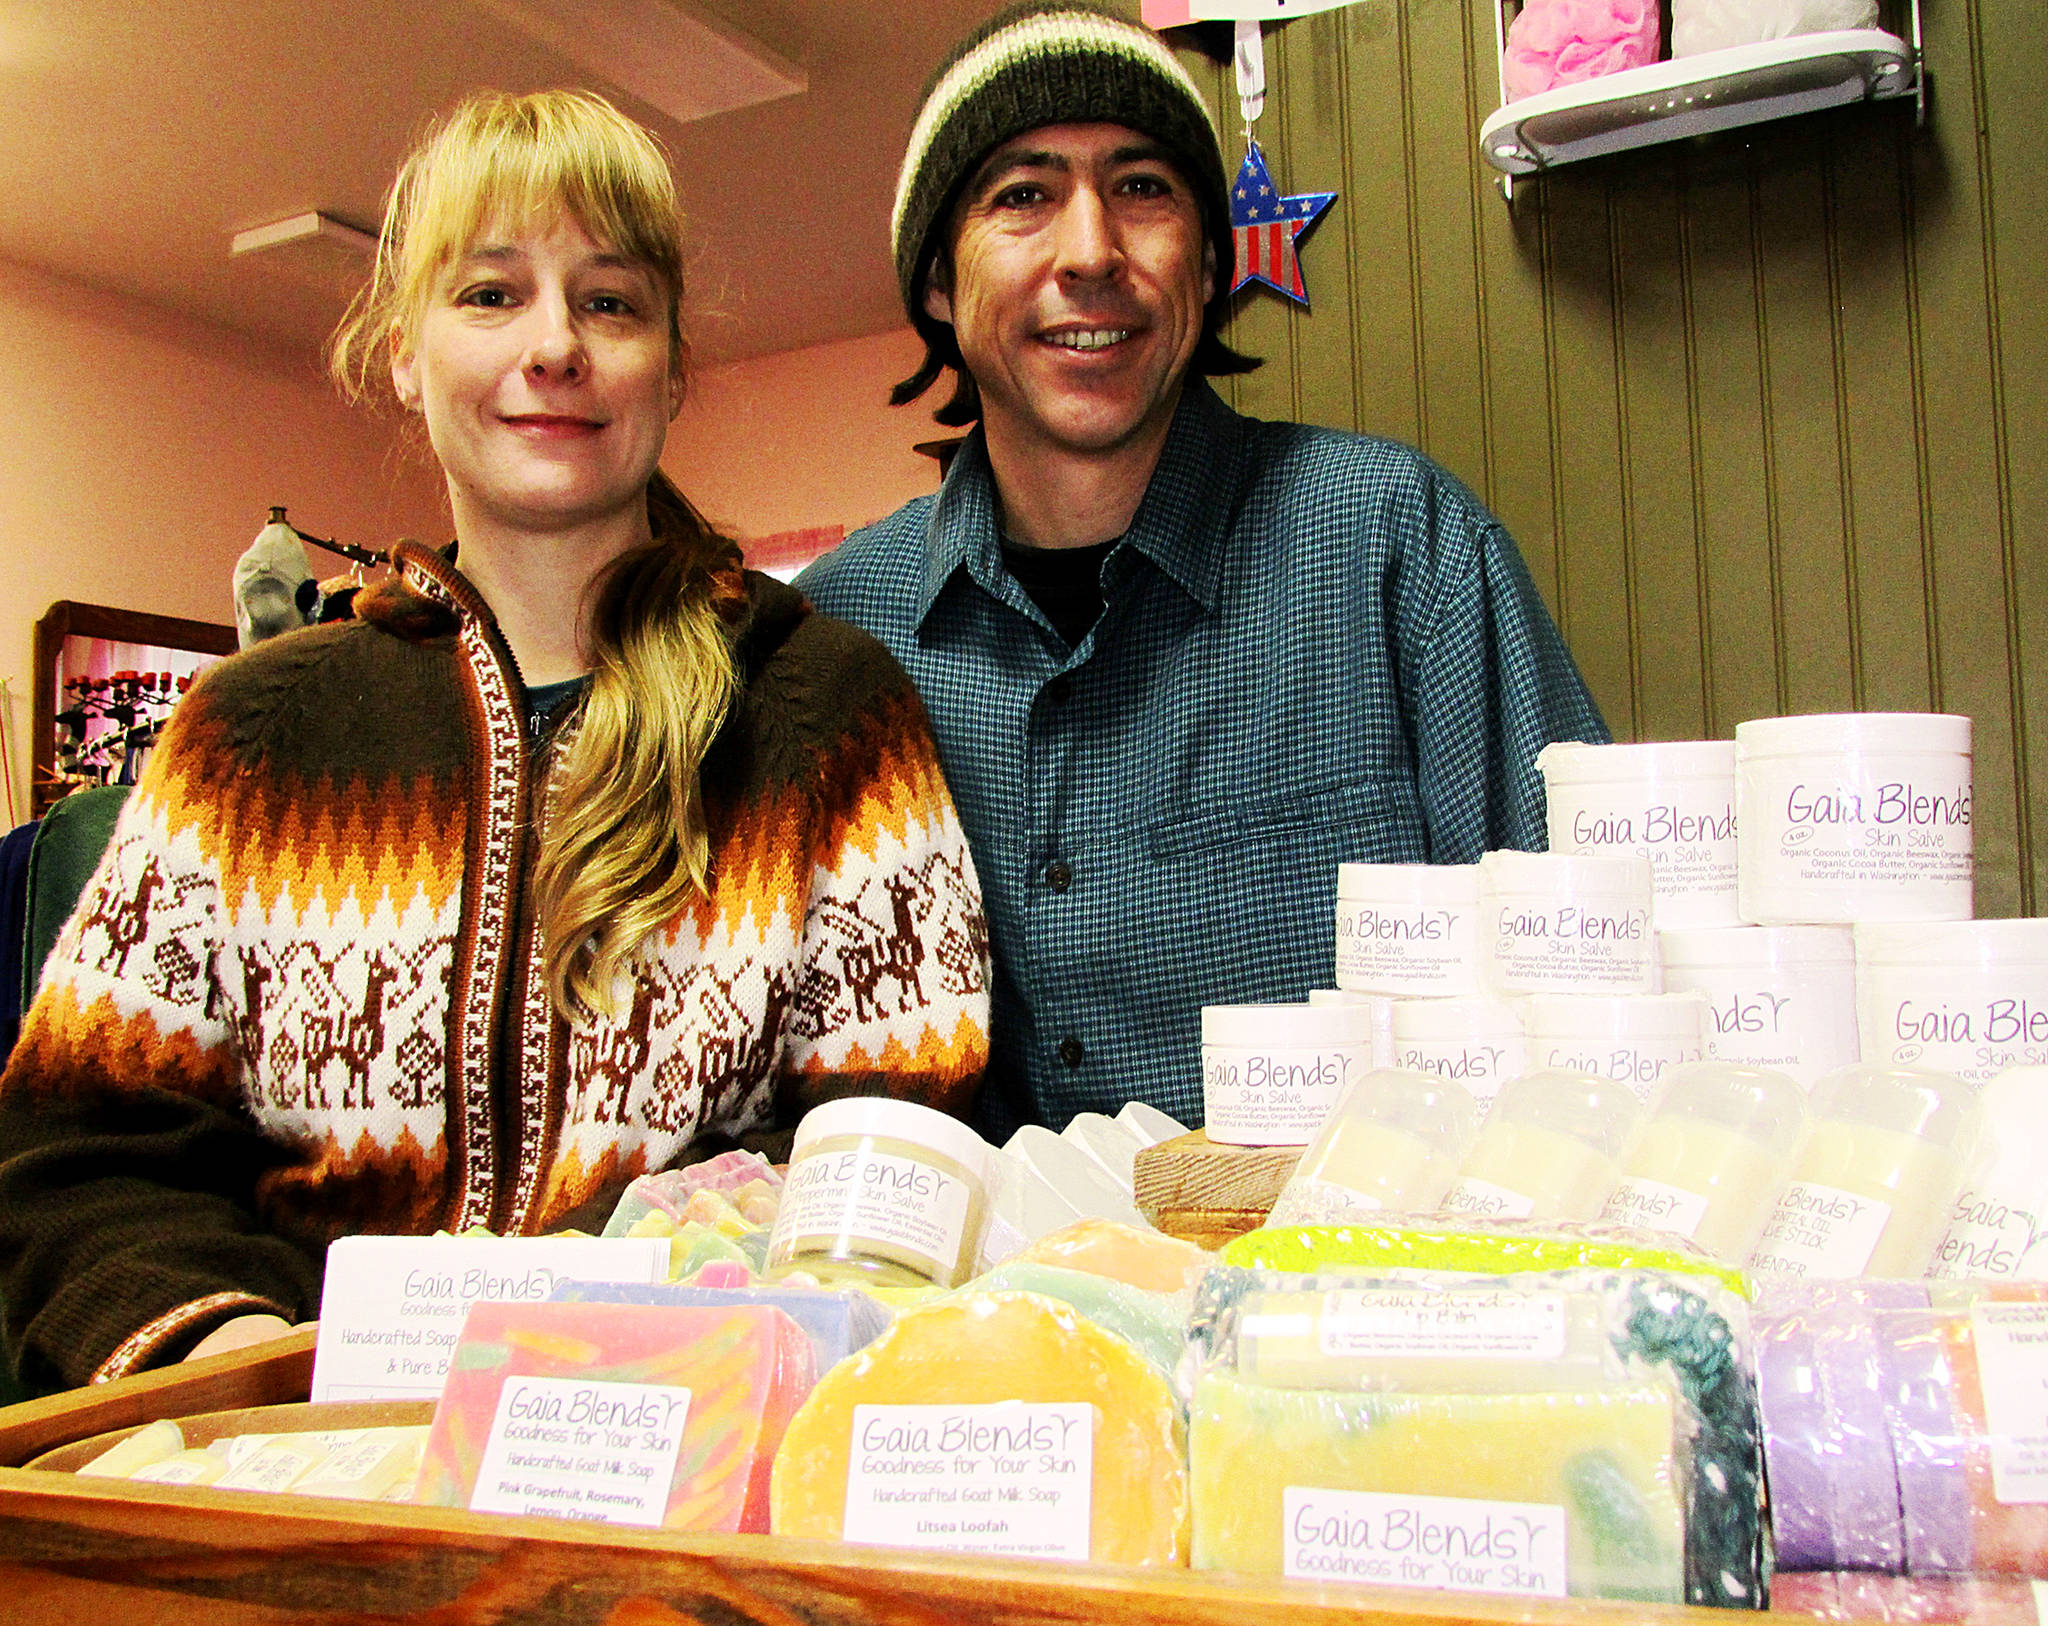 Laura and Ben Brannon make their Gaia Blend organic salves, soaps and other products at their home in Ocean Shores.